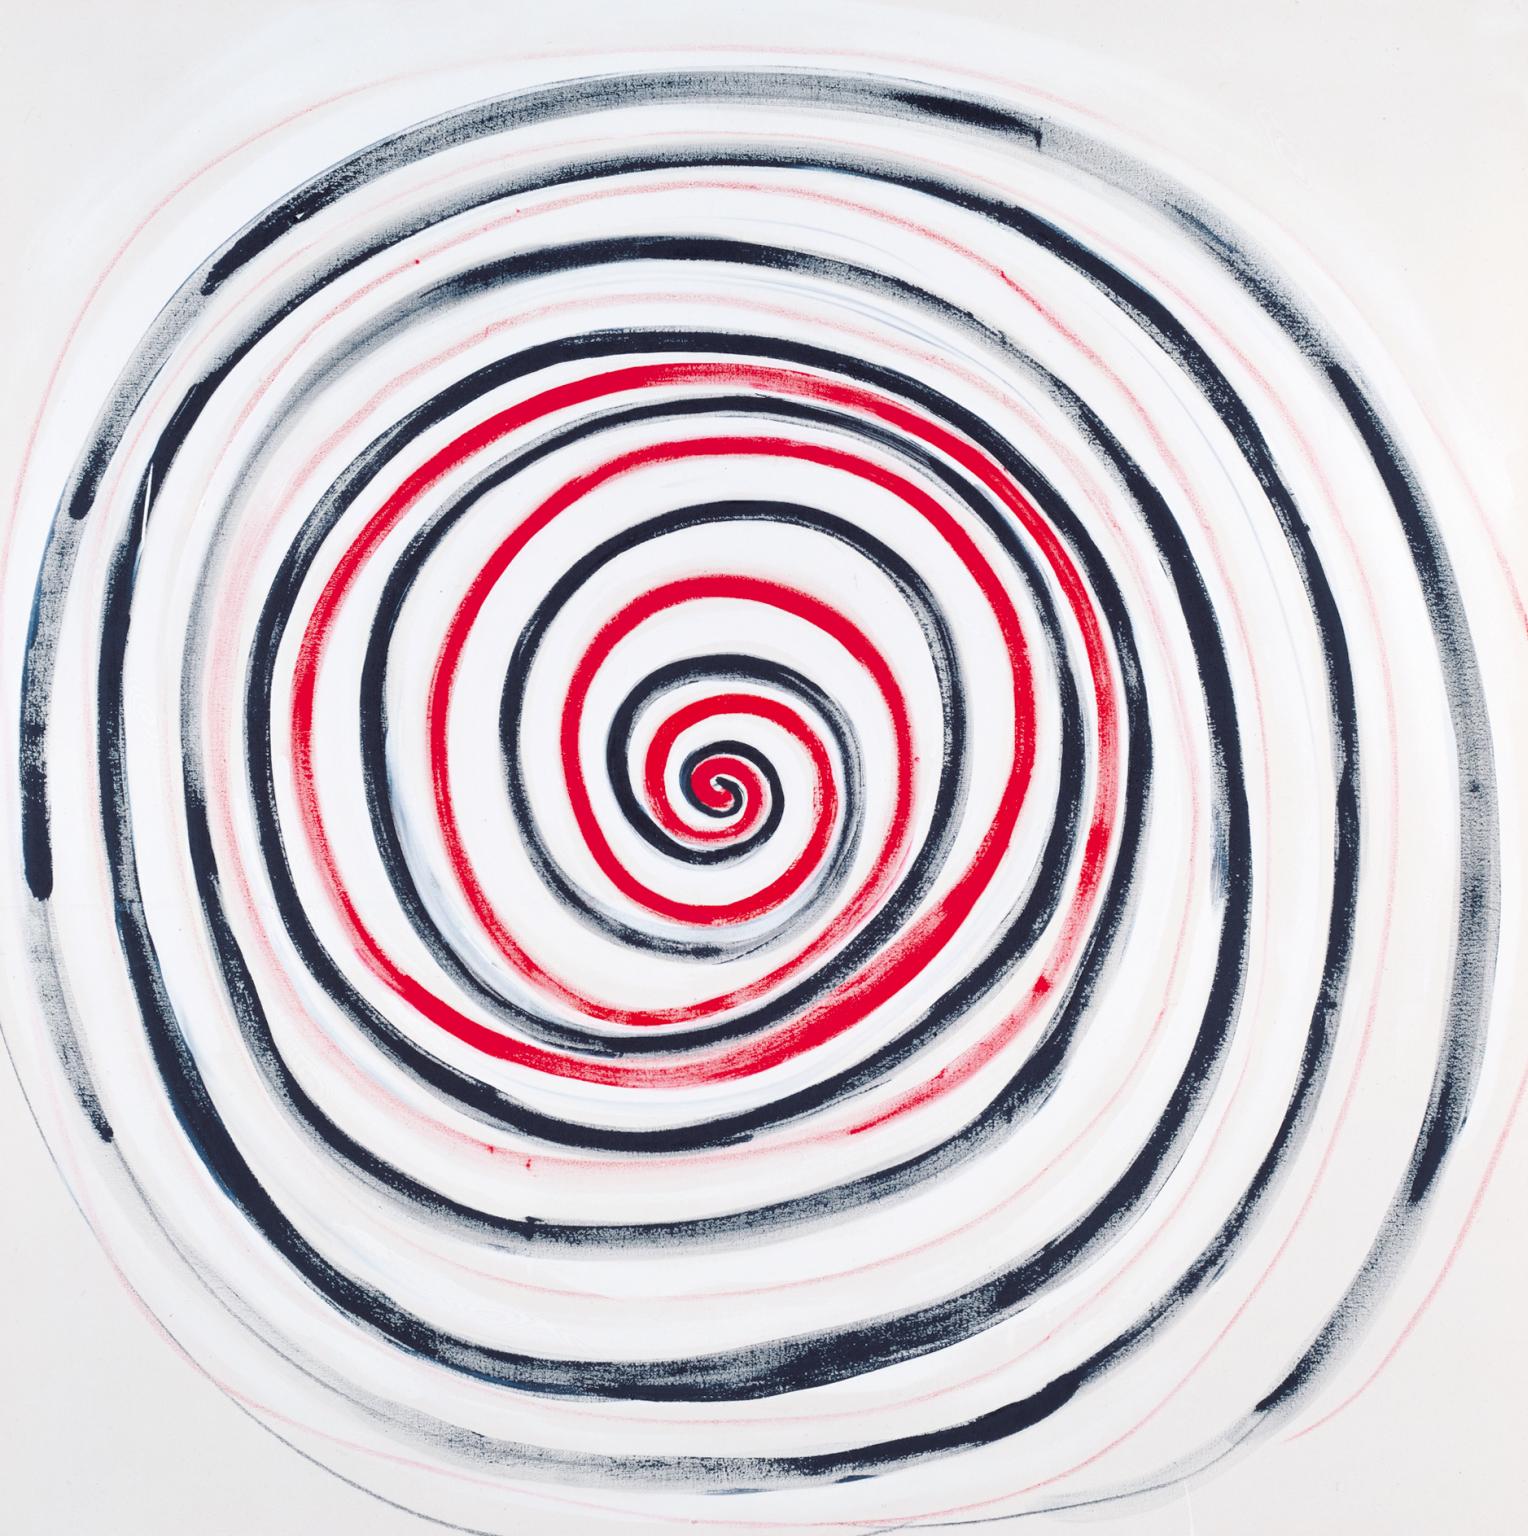 R. B. and W. Spiral for A.', Sir Terry Frost, 1991